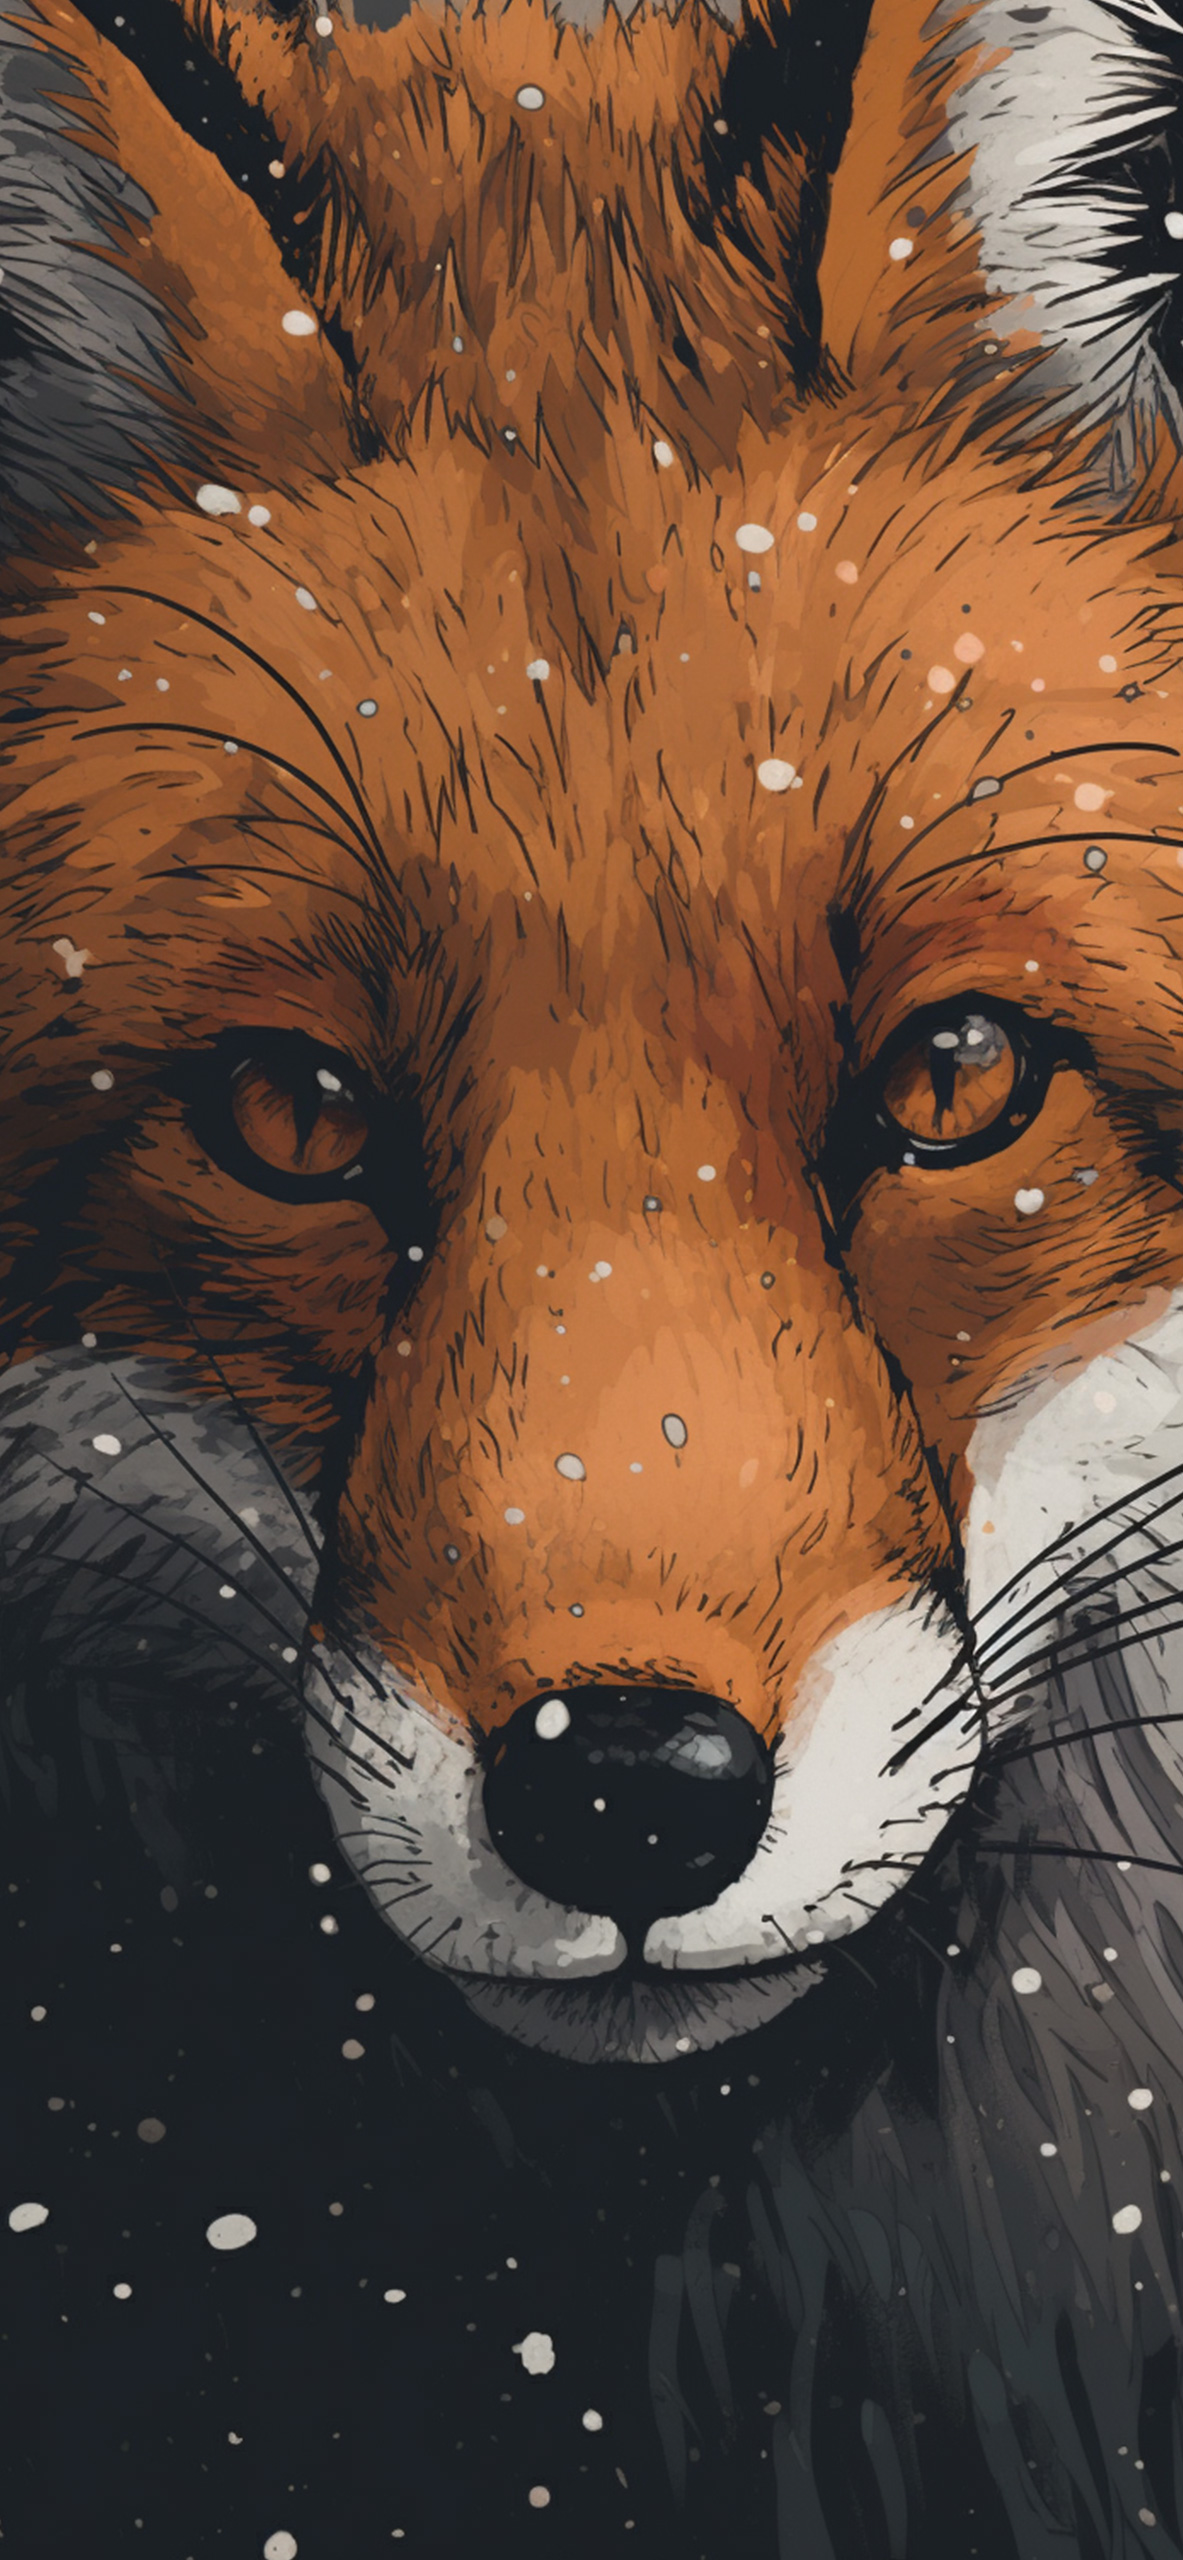 Snowy wallpaper illustrations for iPhone